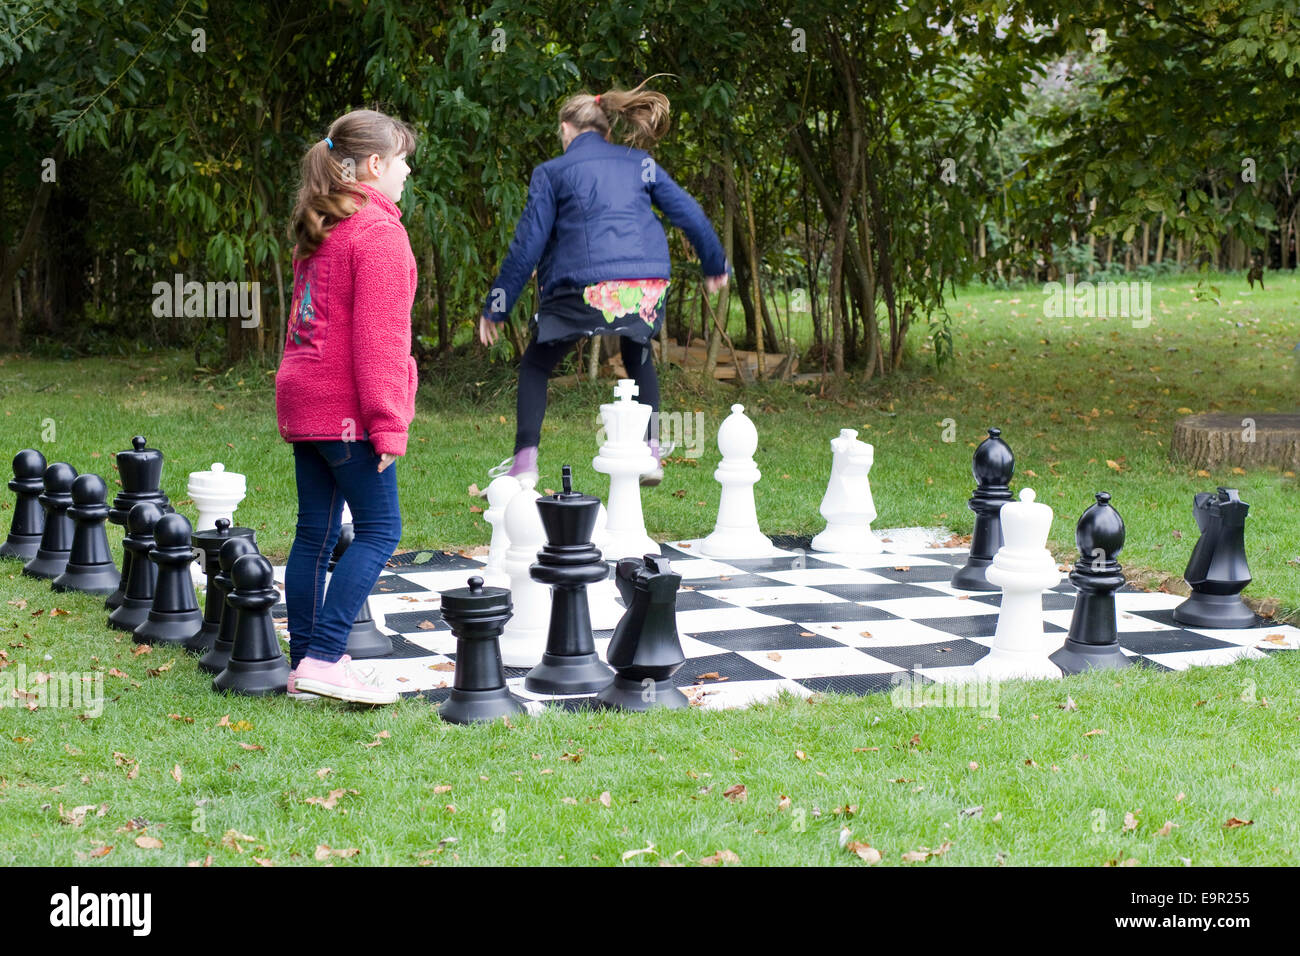 Children playing on a giant garden chess set Stock Photo